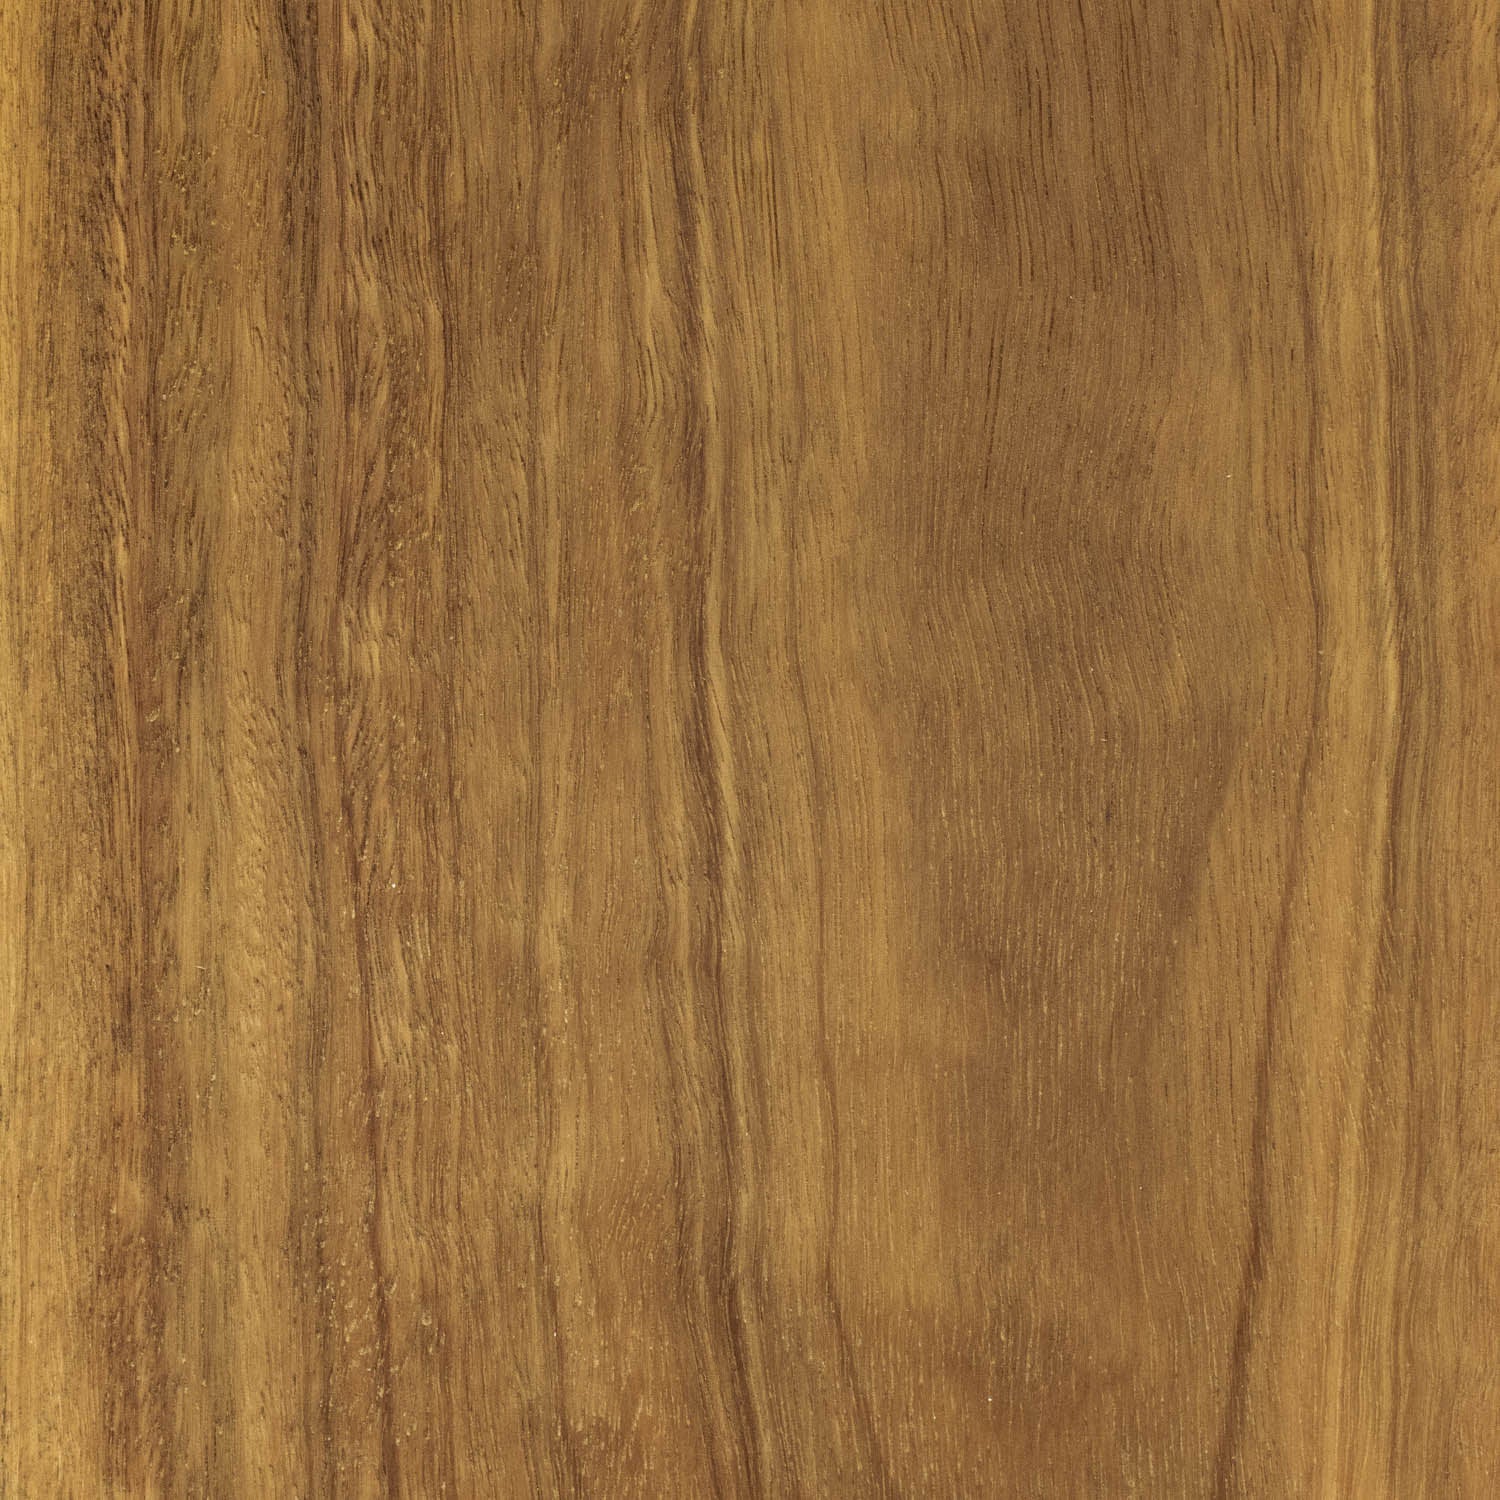 Solid Timber Flooring - Spotted Gum Feature - 80x14mm - PRICE BY